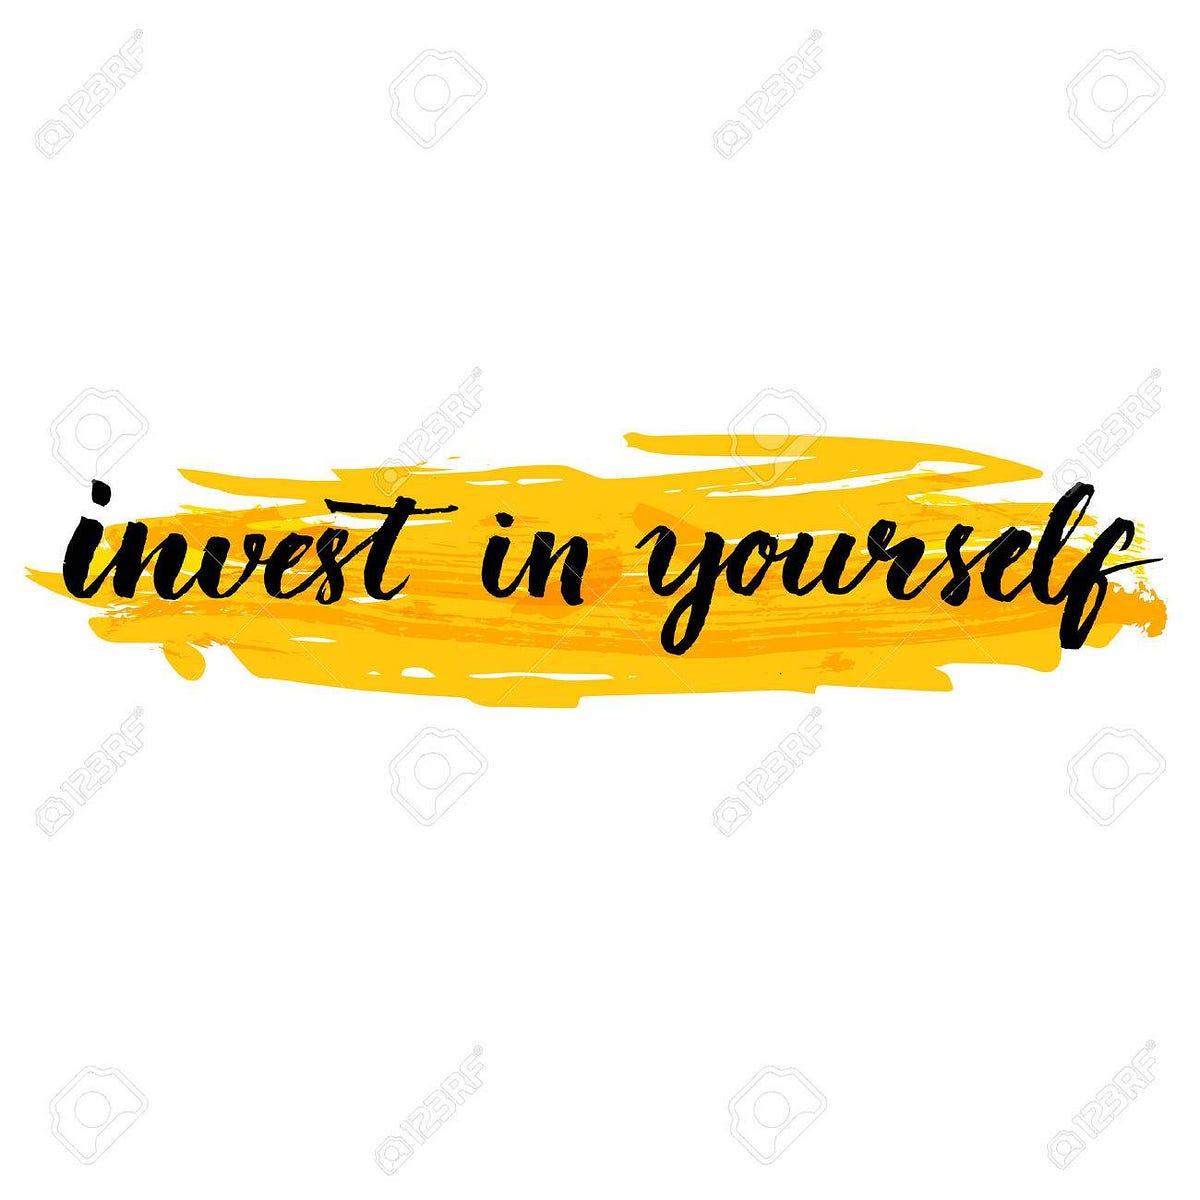 Invest In Yourself: Invest in yourself by prioritizing self-care and finding a routine that works for you